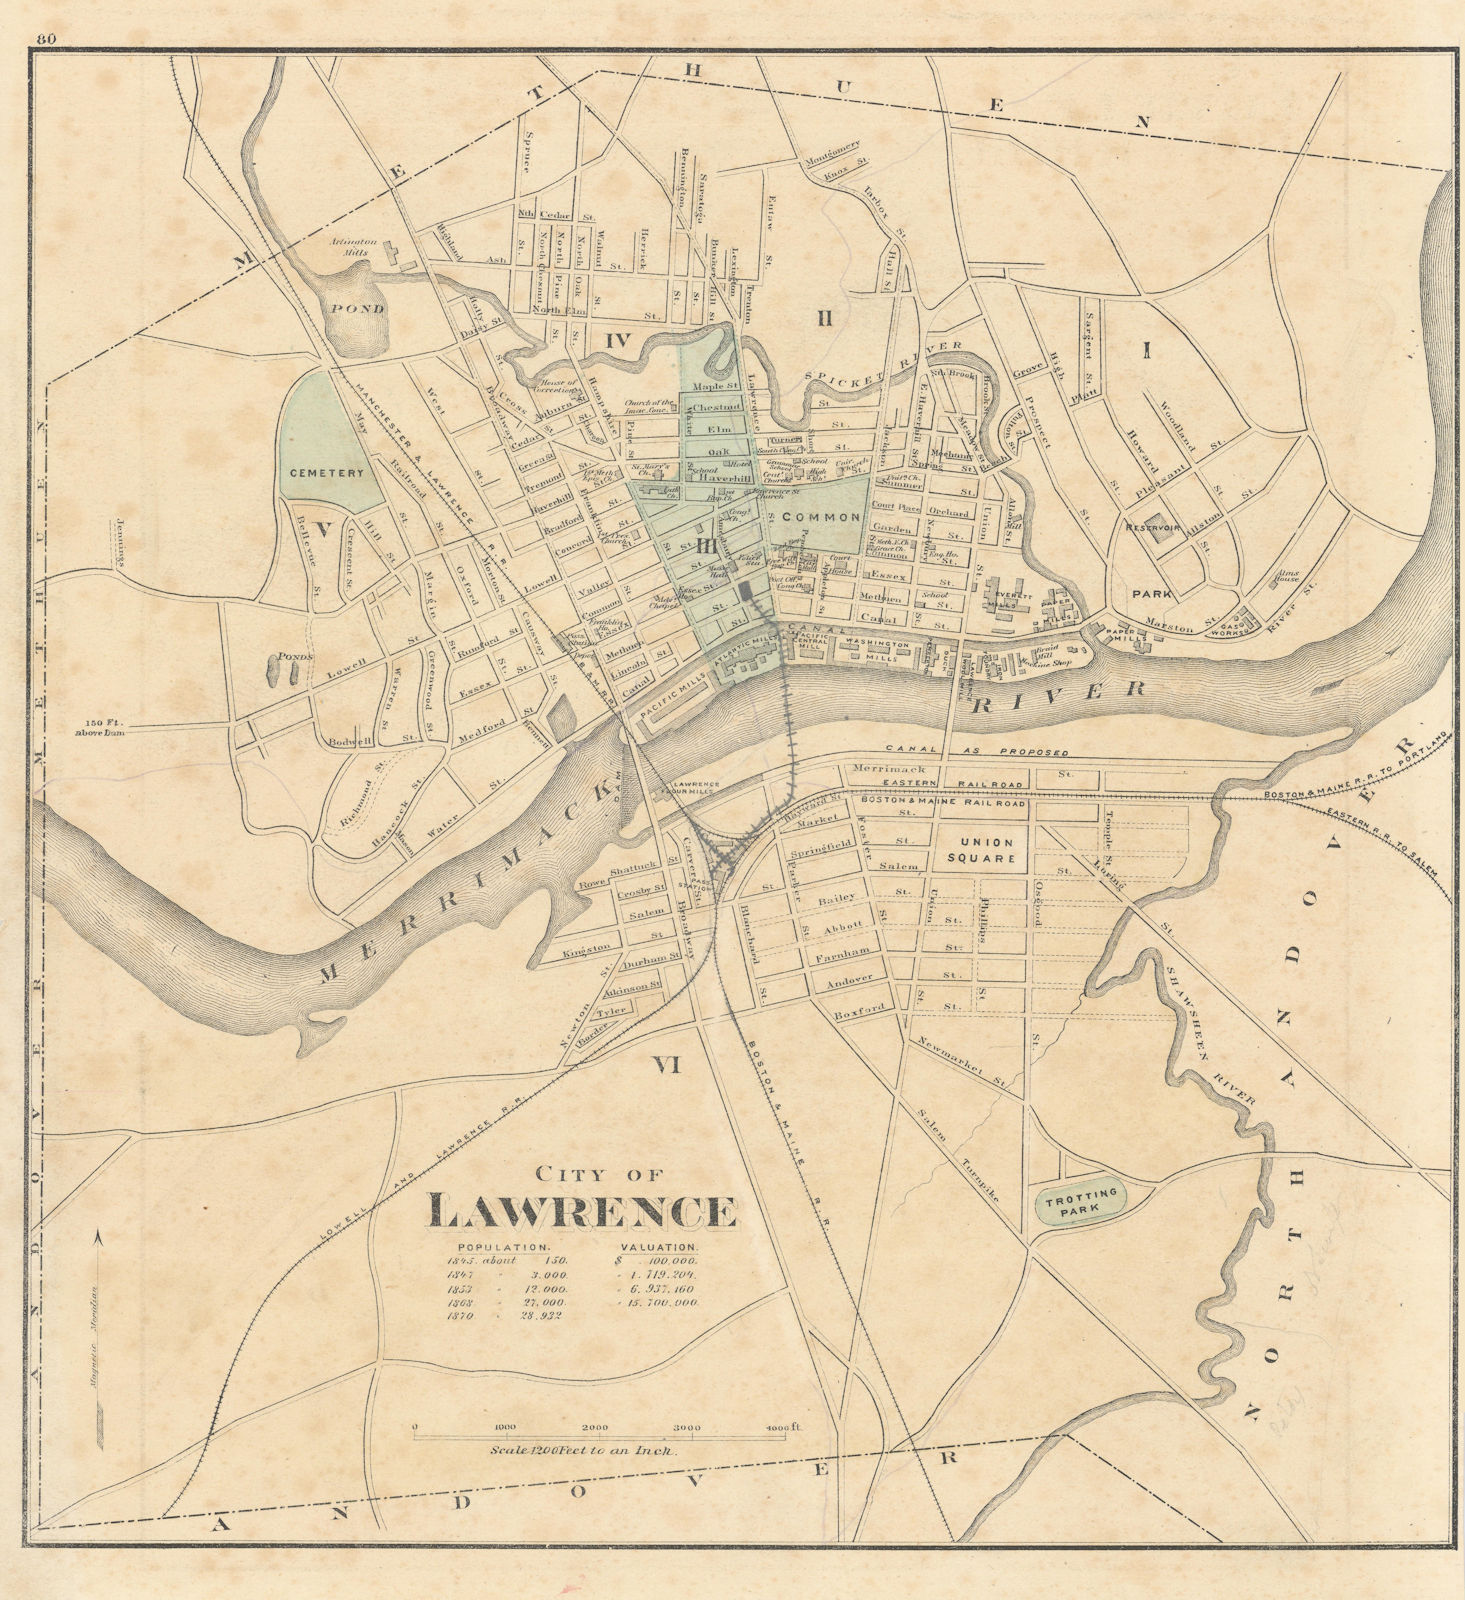 City of Lawrence, Massachusetts. Town plan. WALLING & GRAY 1871 old map